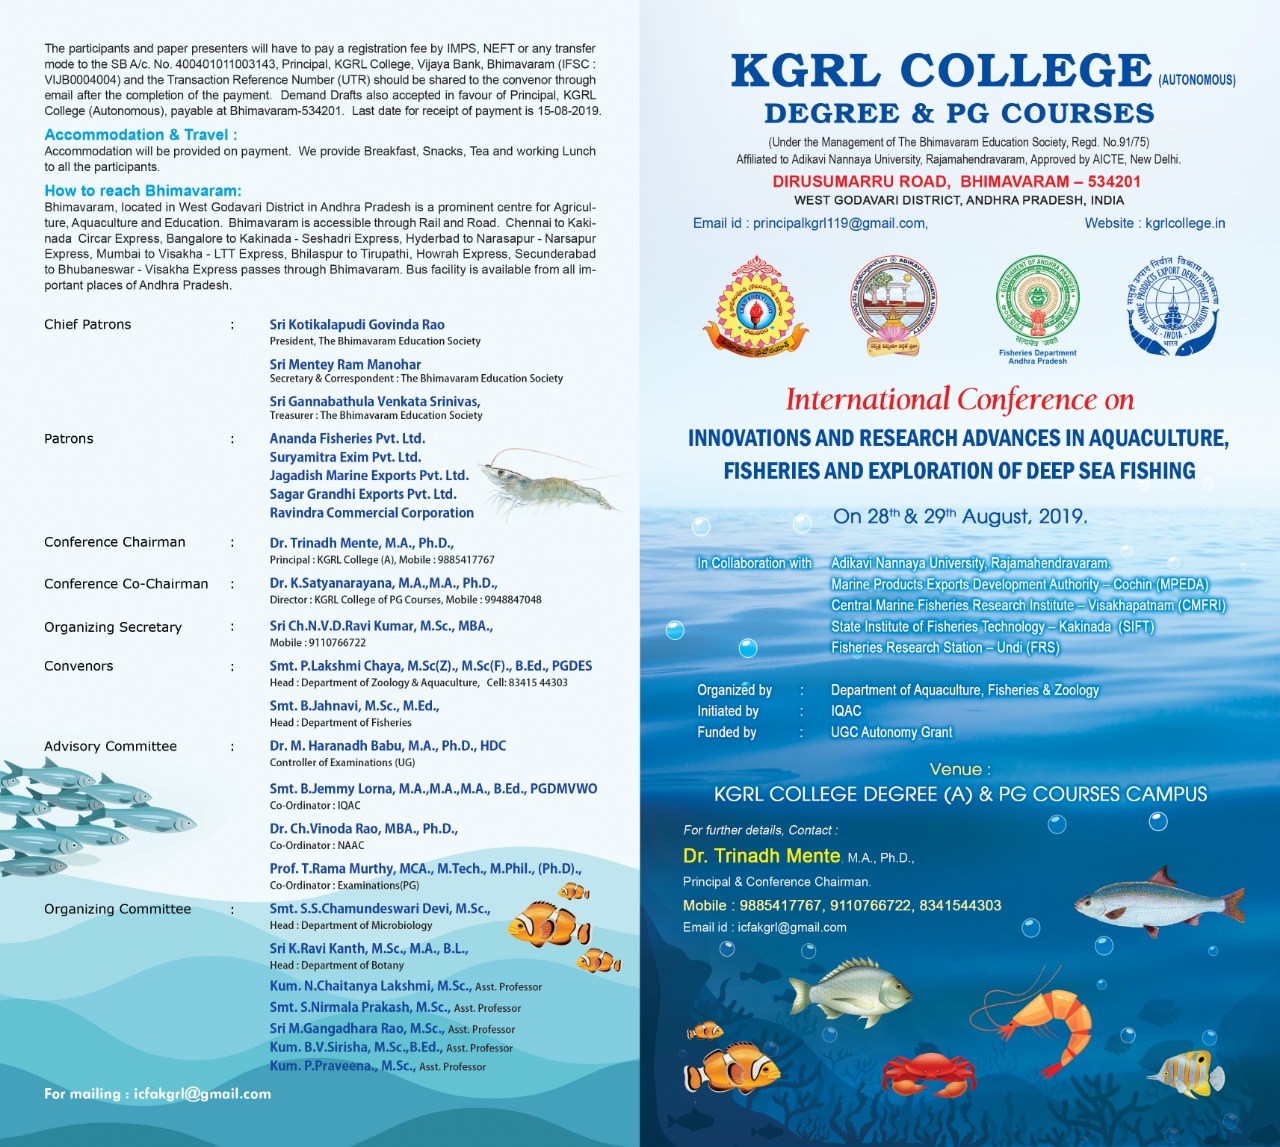 International Conference on Innovations and Research advances in Aquaculture, Fisheries and Exploration of Deep Sea Fishing 2019